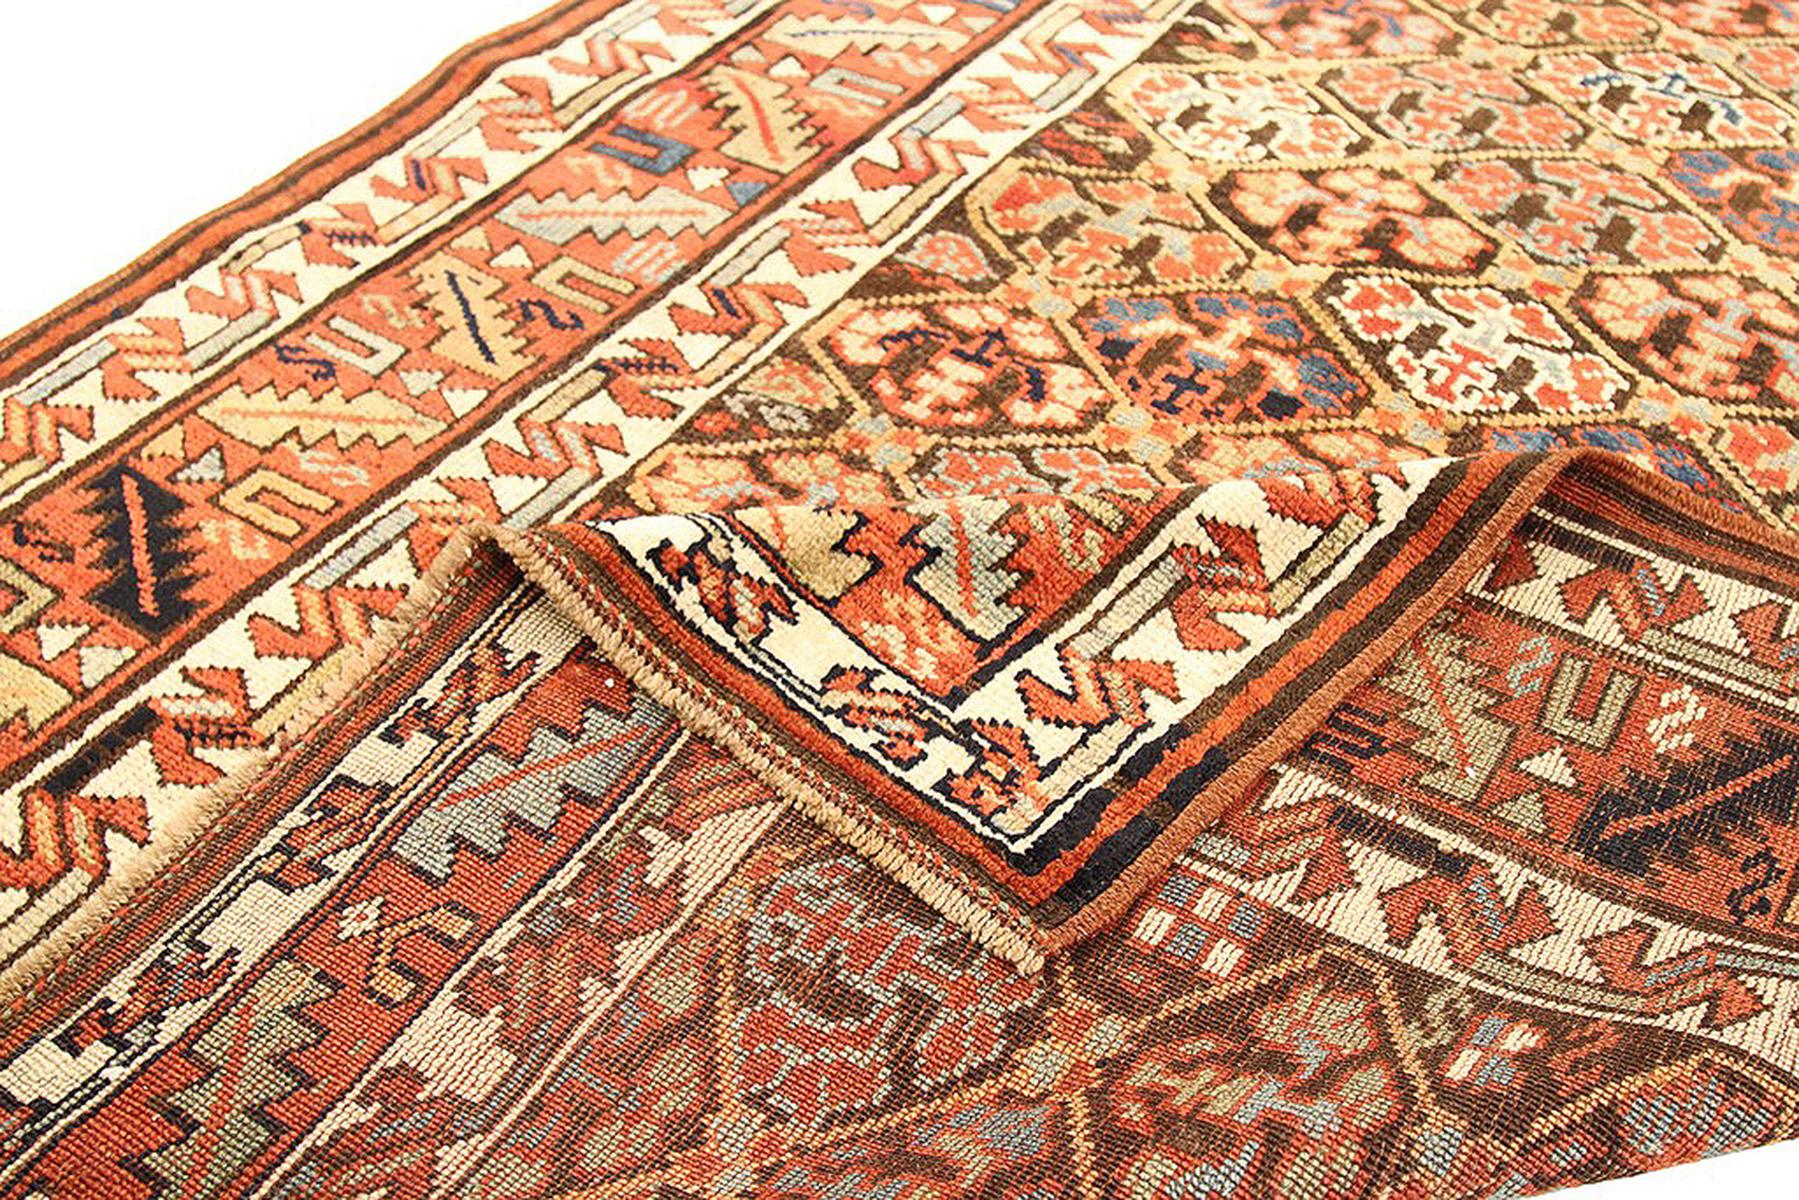 Islamic 1900s Persian Bijar Runner Rug with Red & Brown All-Over Floral Motifs on Ivory For Sale